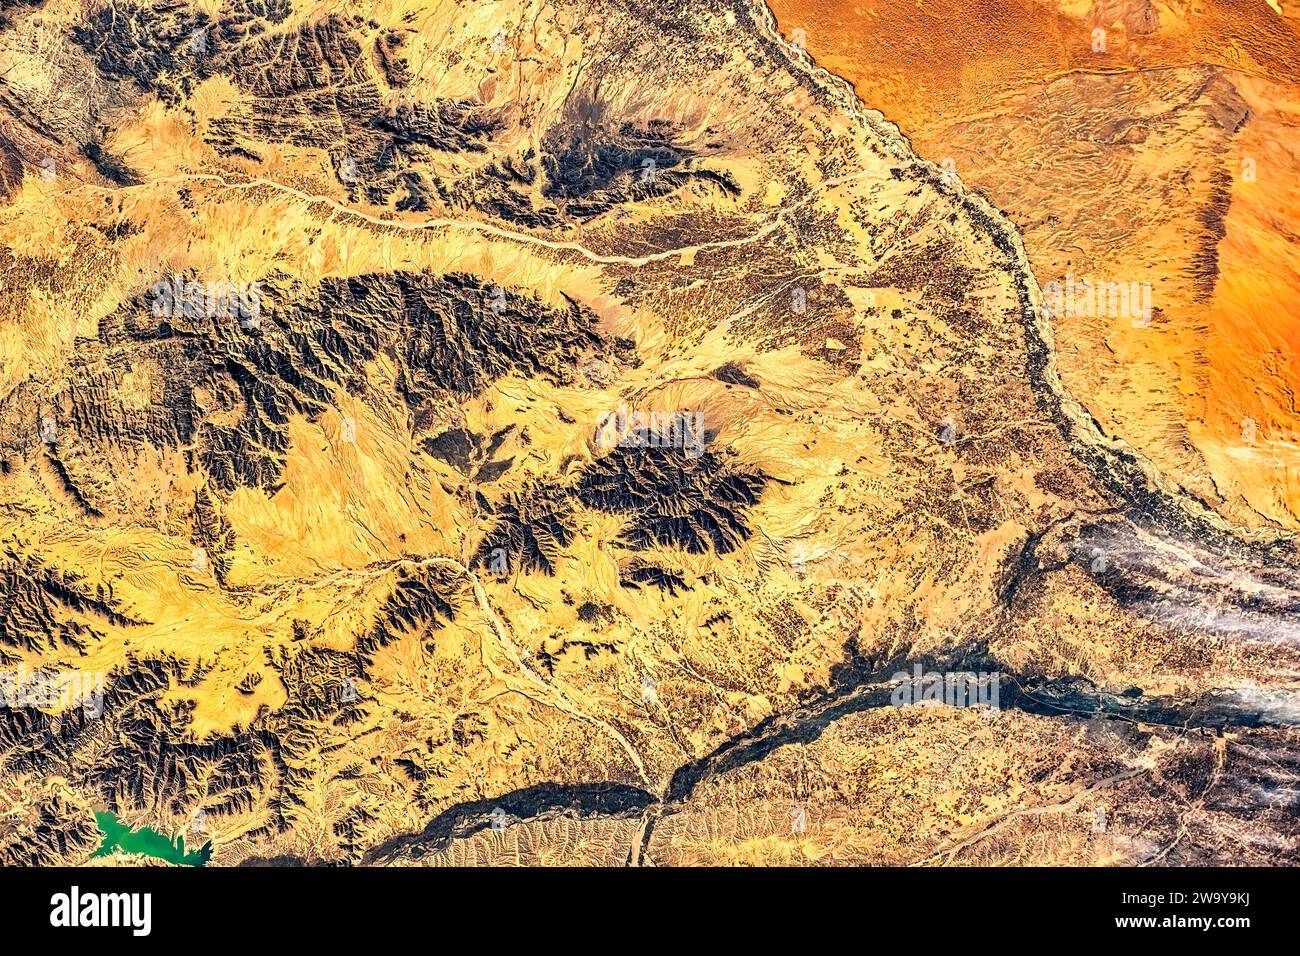 The beauty of Desert Land in Afghanistan. Digital enhancement of a NASA image. Stock Photo